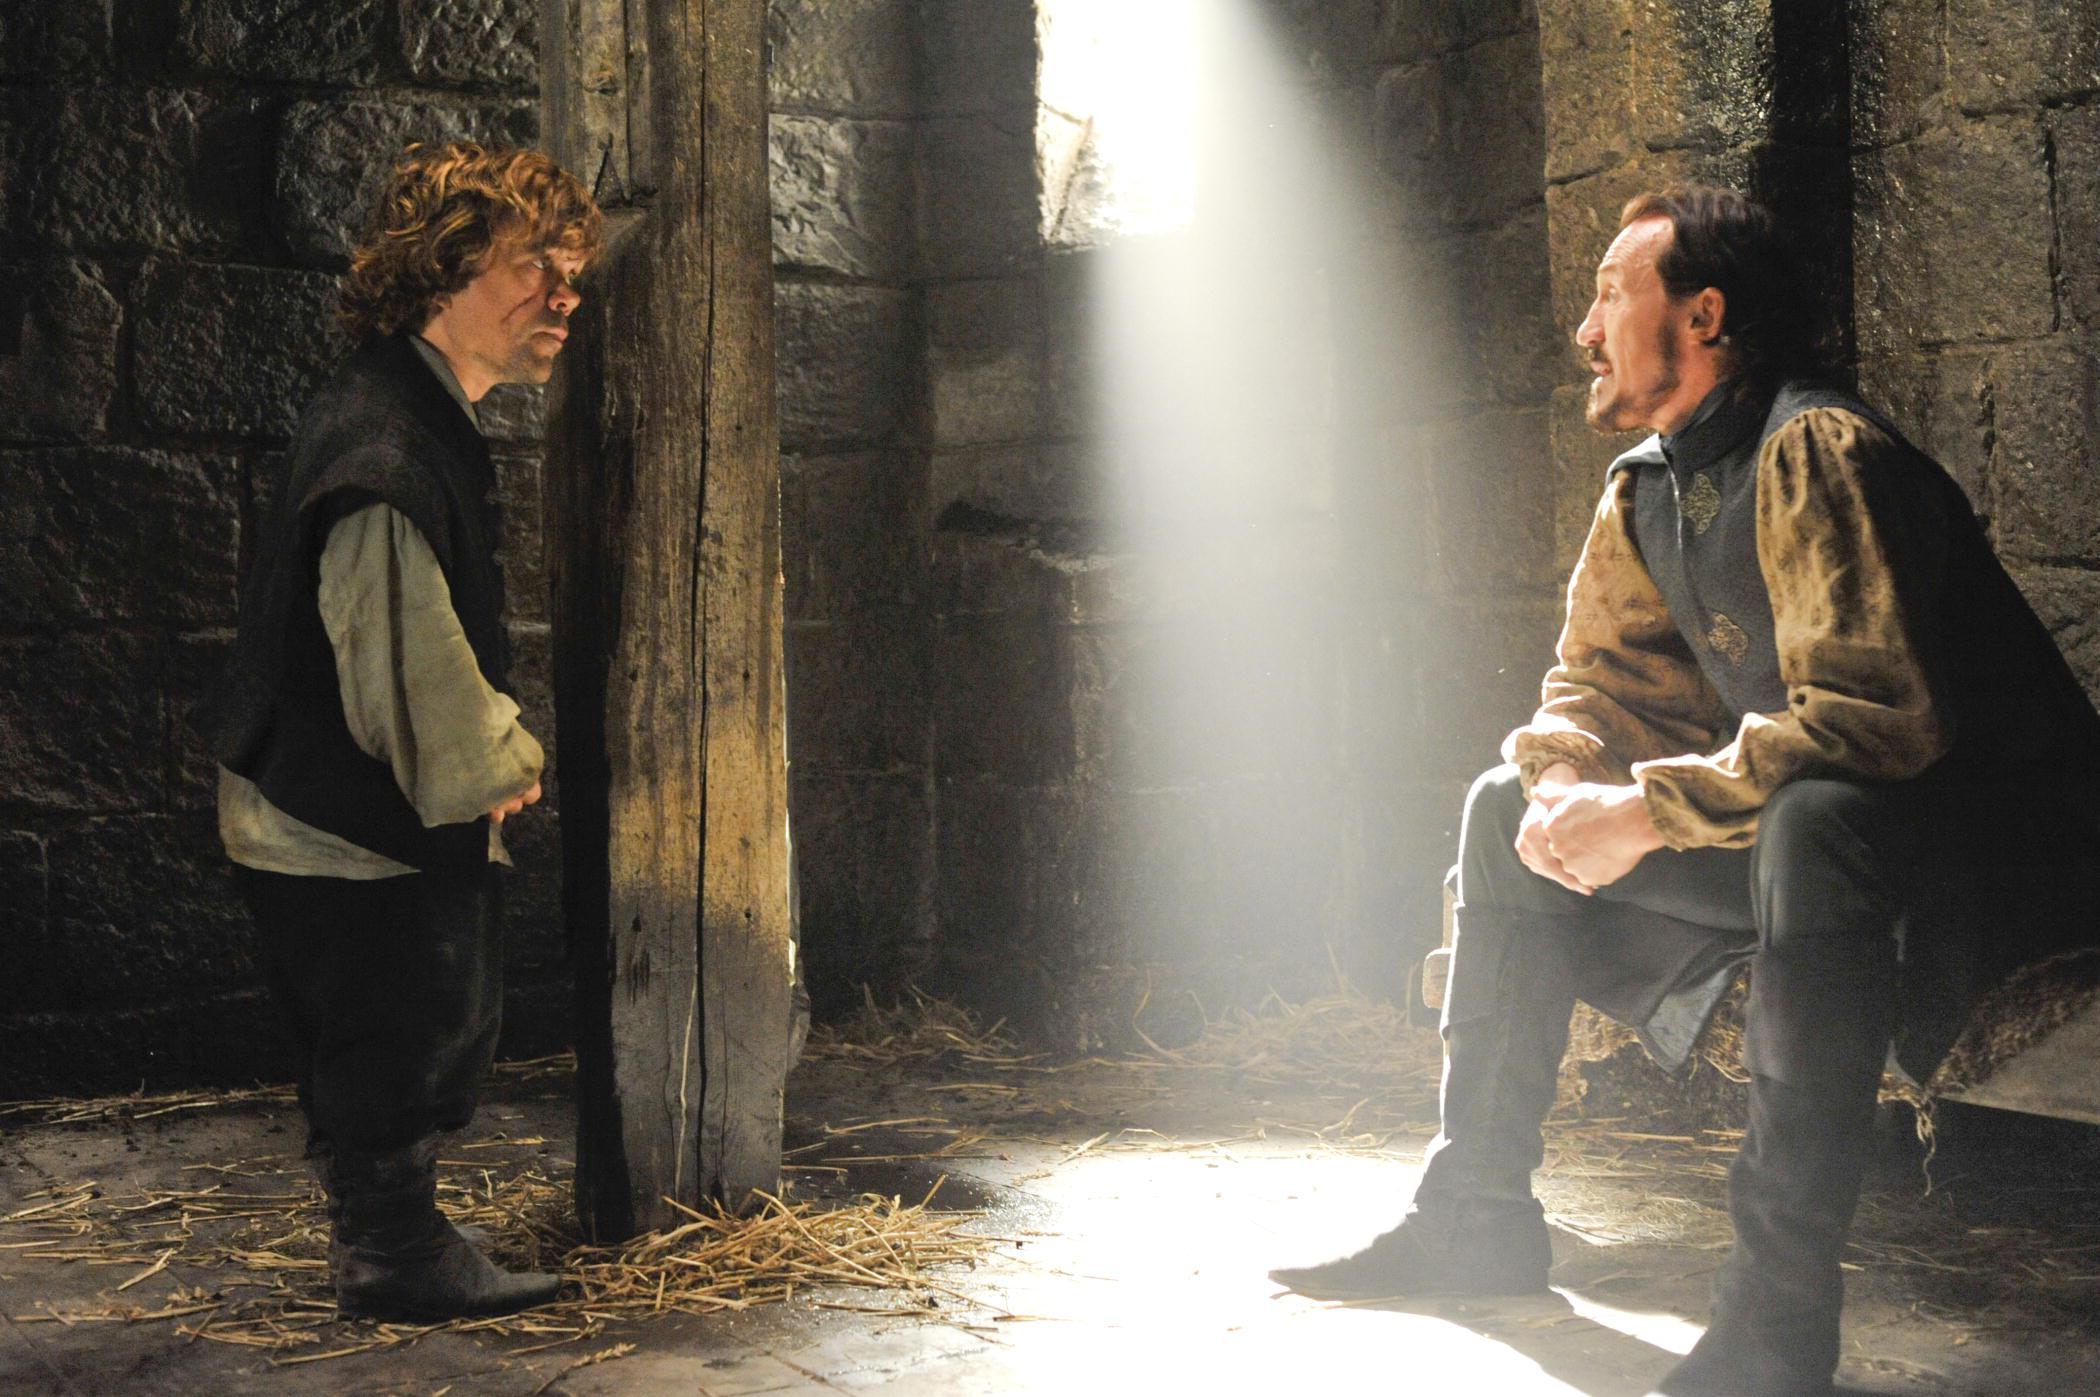 Tyrion Lannister (Peter Dinklage) and Bronn (Jerome Flynn) in Game of Thrones.